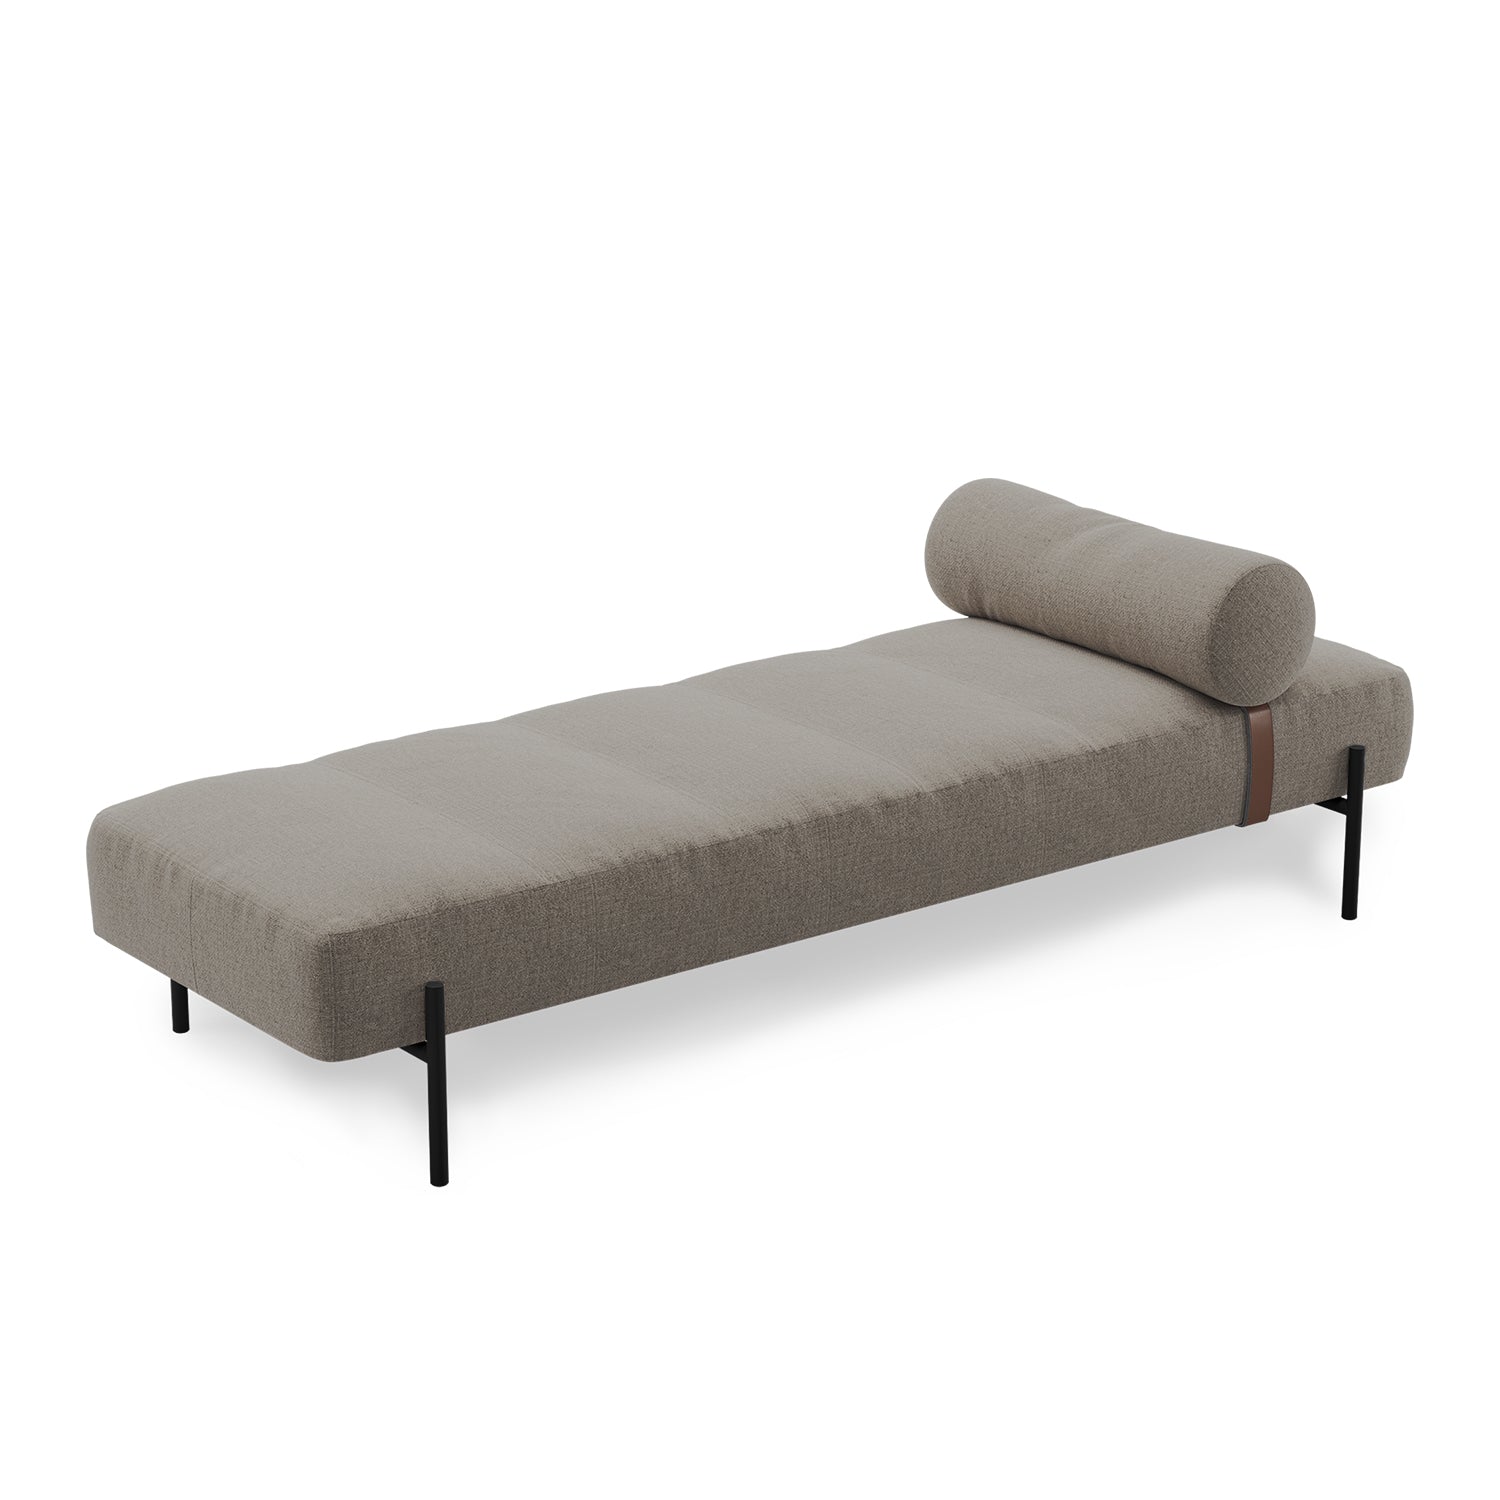 Northern Daybe Daybed in brusvik 66 and Black legs